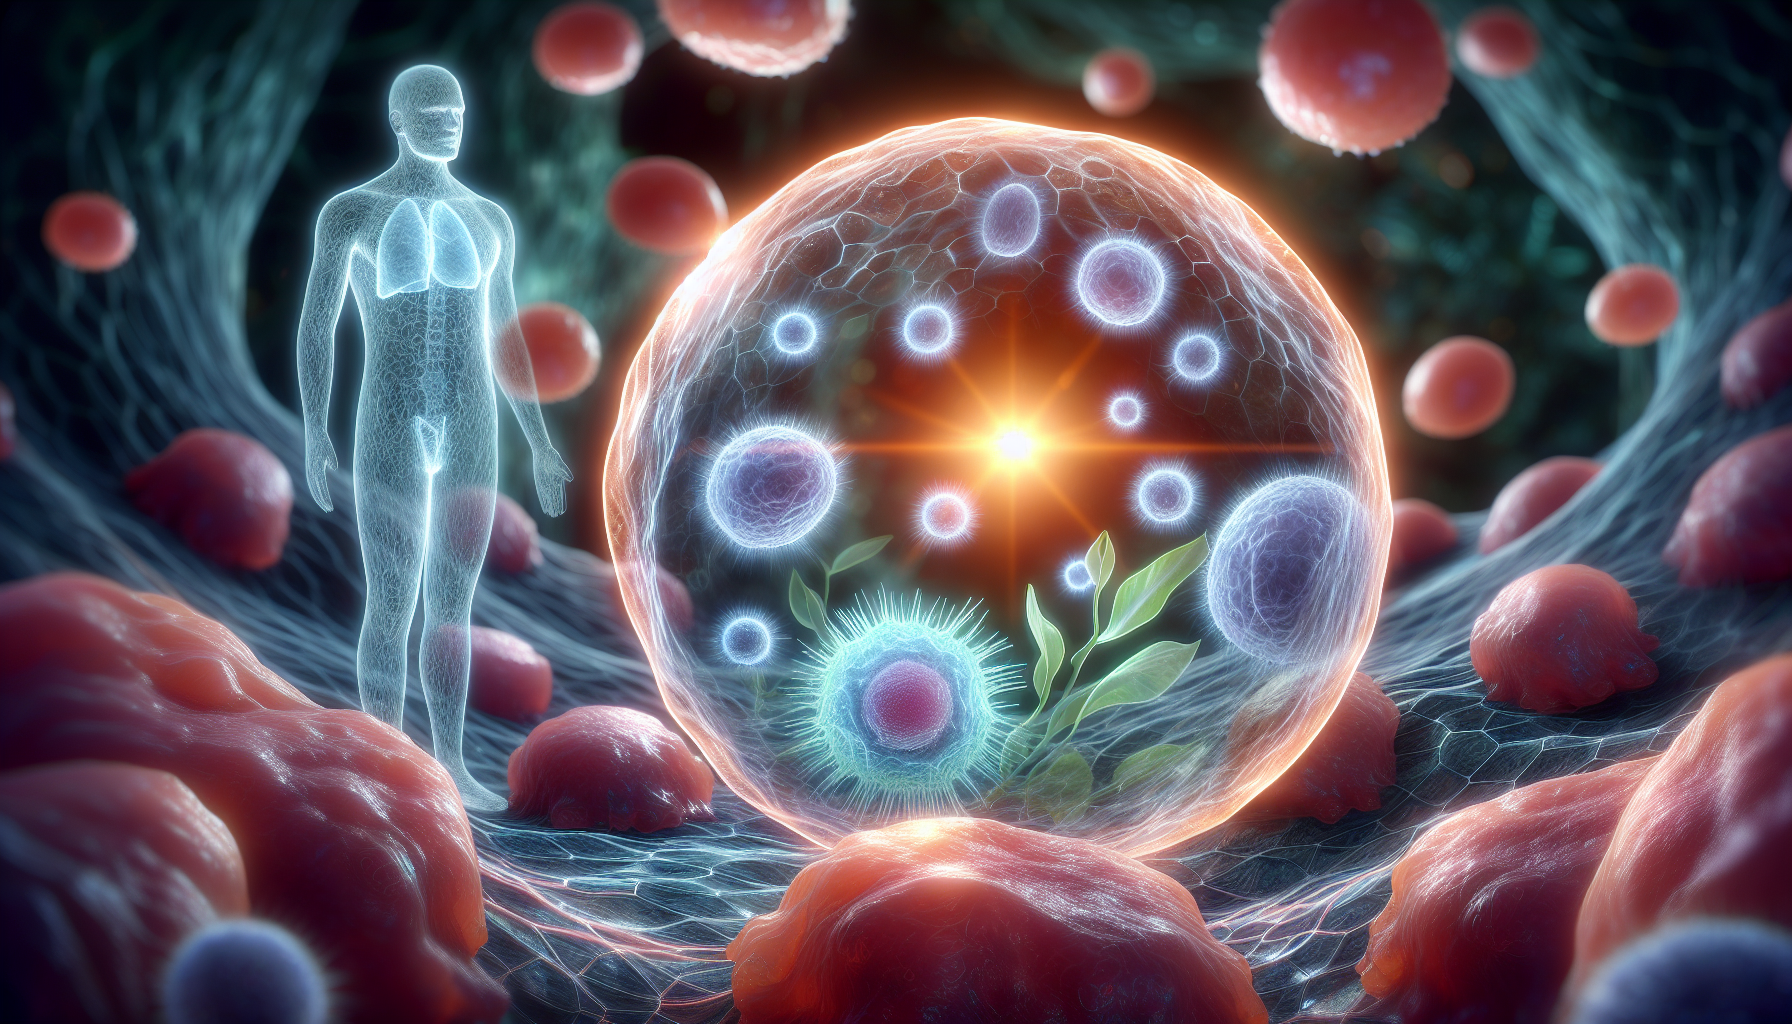 An illustration showing cells being protected by a shield, symbolizing lactoferrin's role as a protector against oxidative stress and cancer cells.